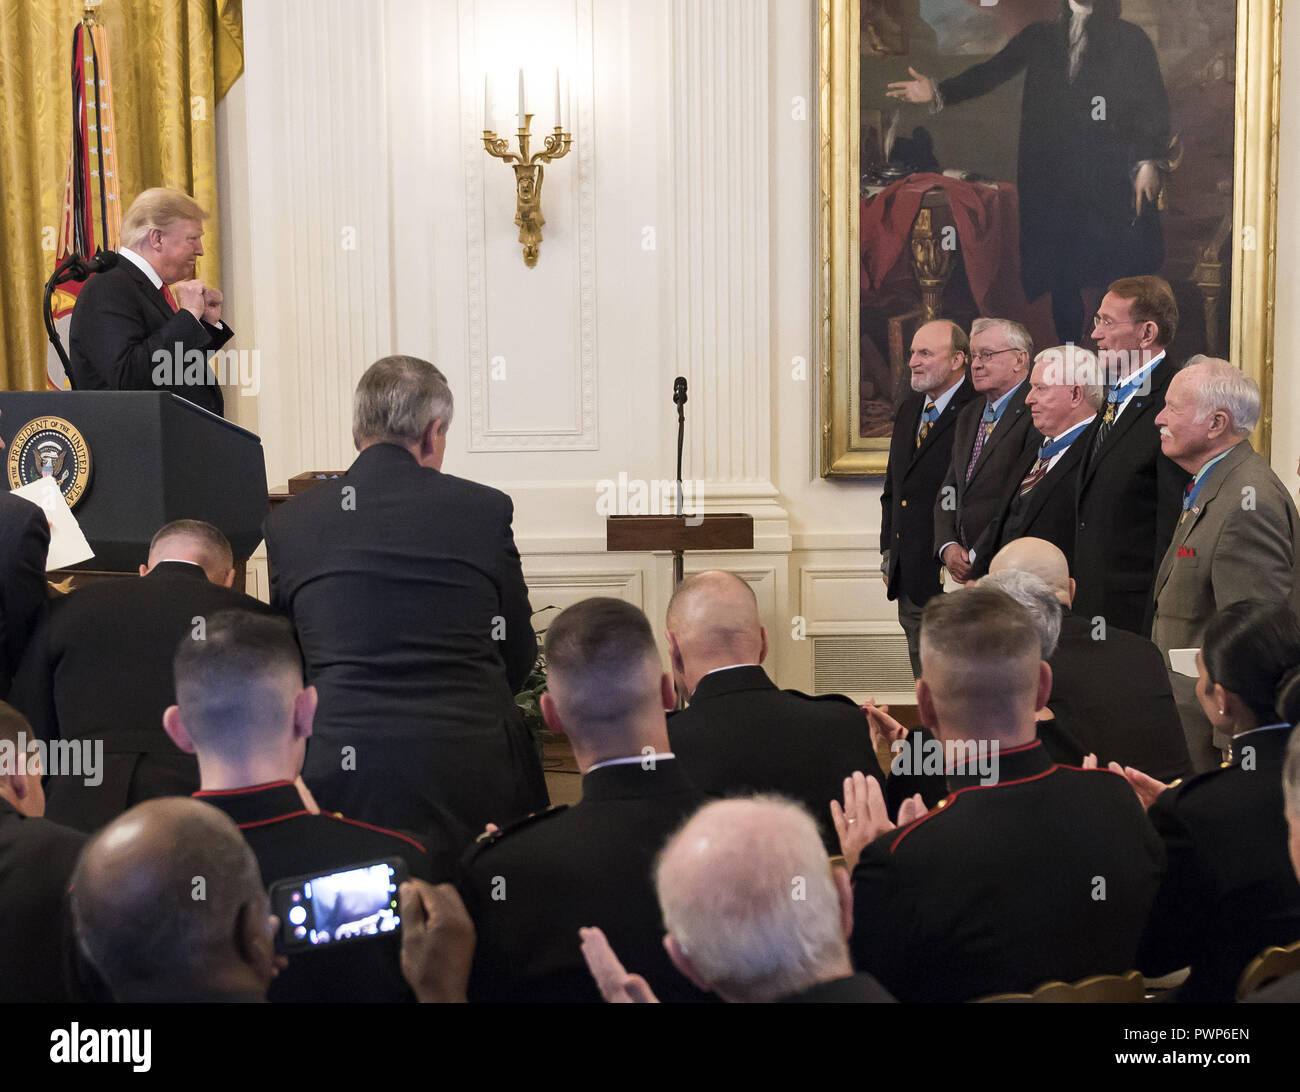 Washington, District of Columbia, USA. 17th Oct, 2018. United States President Donald J. Trump acknowledges previous recipients during the ceremony where he will award the Medal of Honor to Sergeant Major John L. Canley, United States Marine Corps (Retired), for conspicuous gallantry during the Vietnam War in a ceremony in the East Room of the the White House in Washington, DC on Wednesday, October 17, 2018 Credit: Ron Sachs/CNP/ZUMA Wire/Alamy Live News Stock Photo